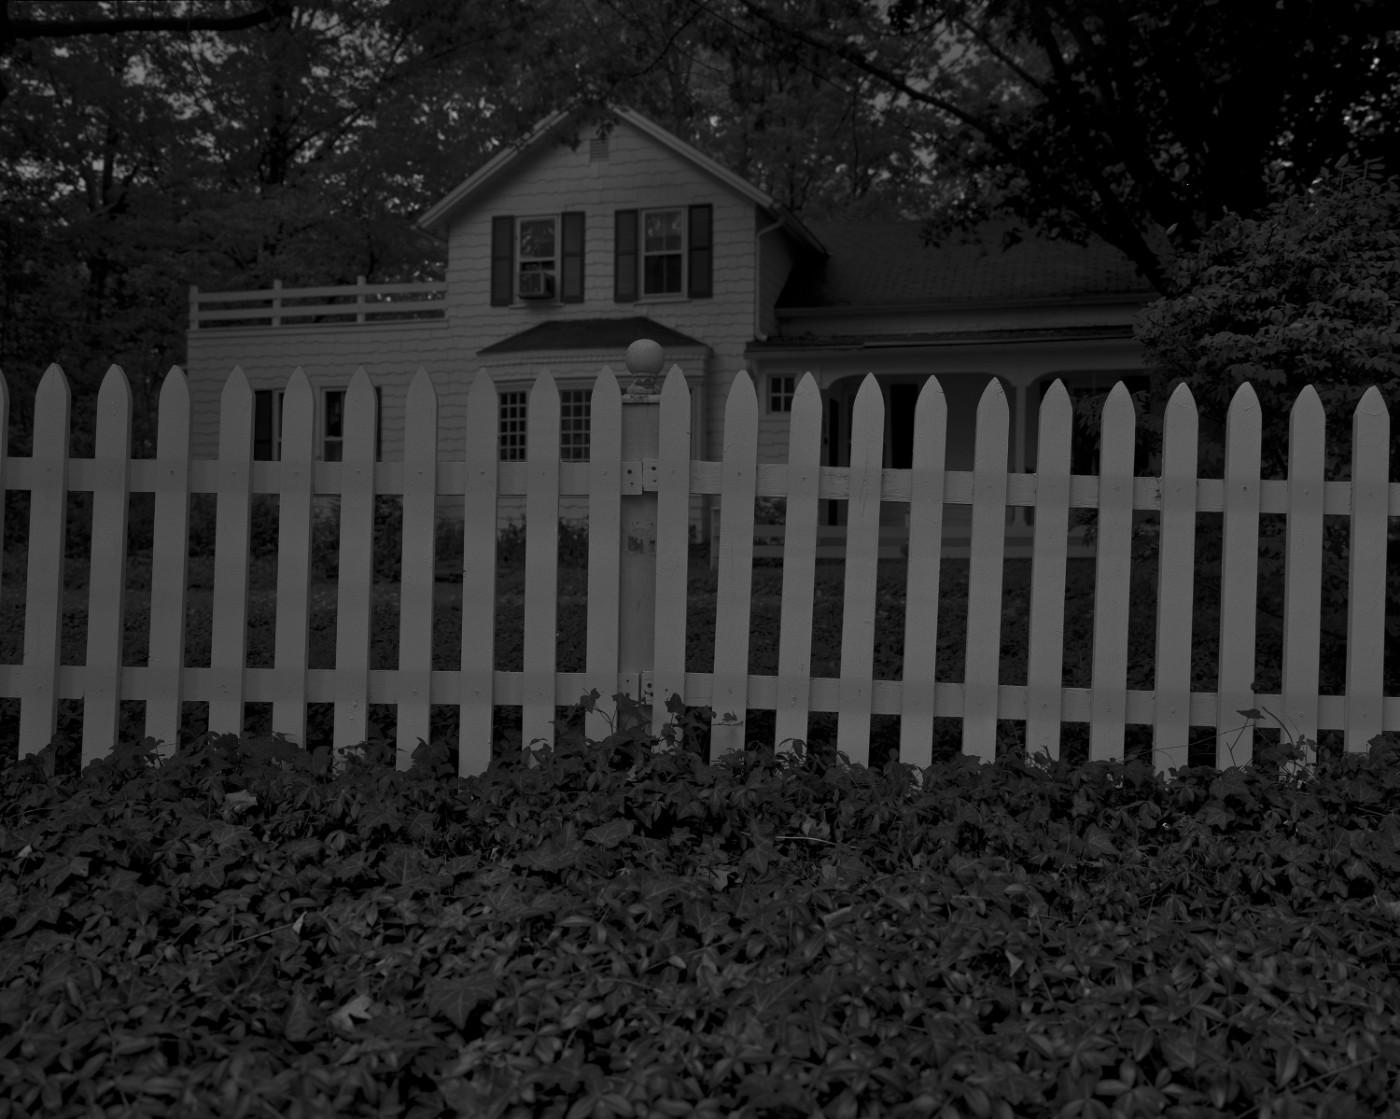 Dawoud Bey. Untitled #1 (Picket Fence and Farmhouse)